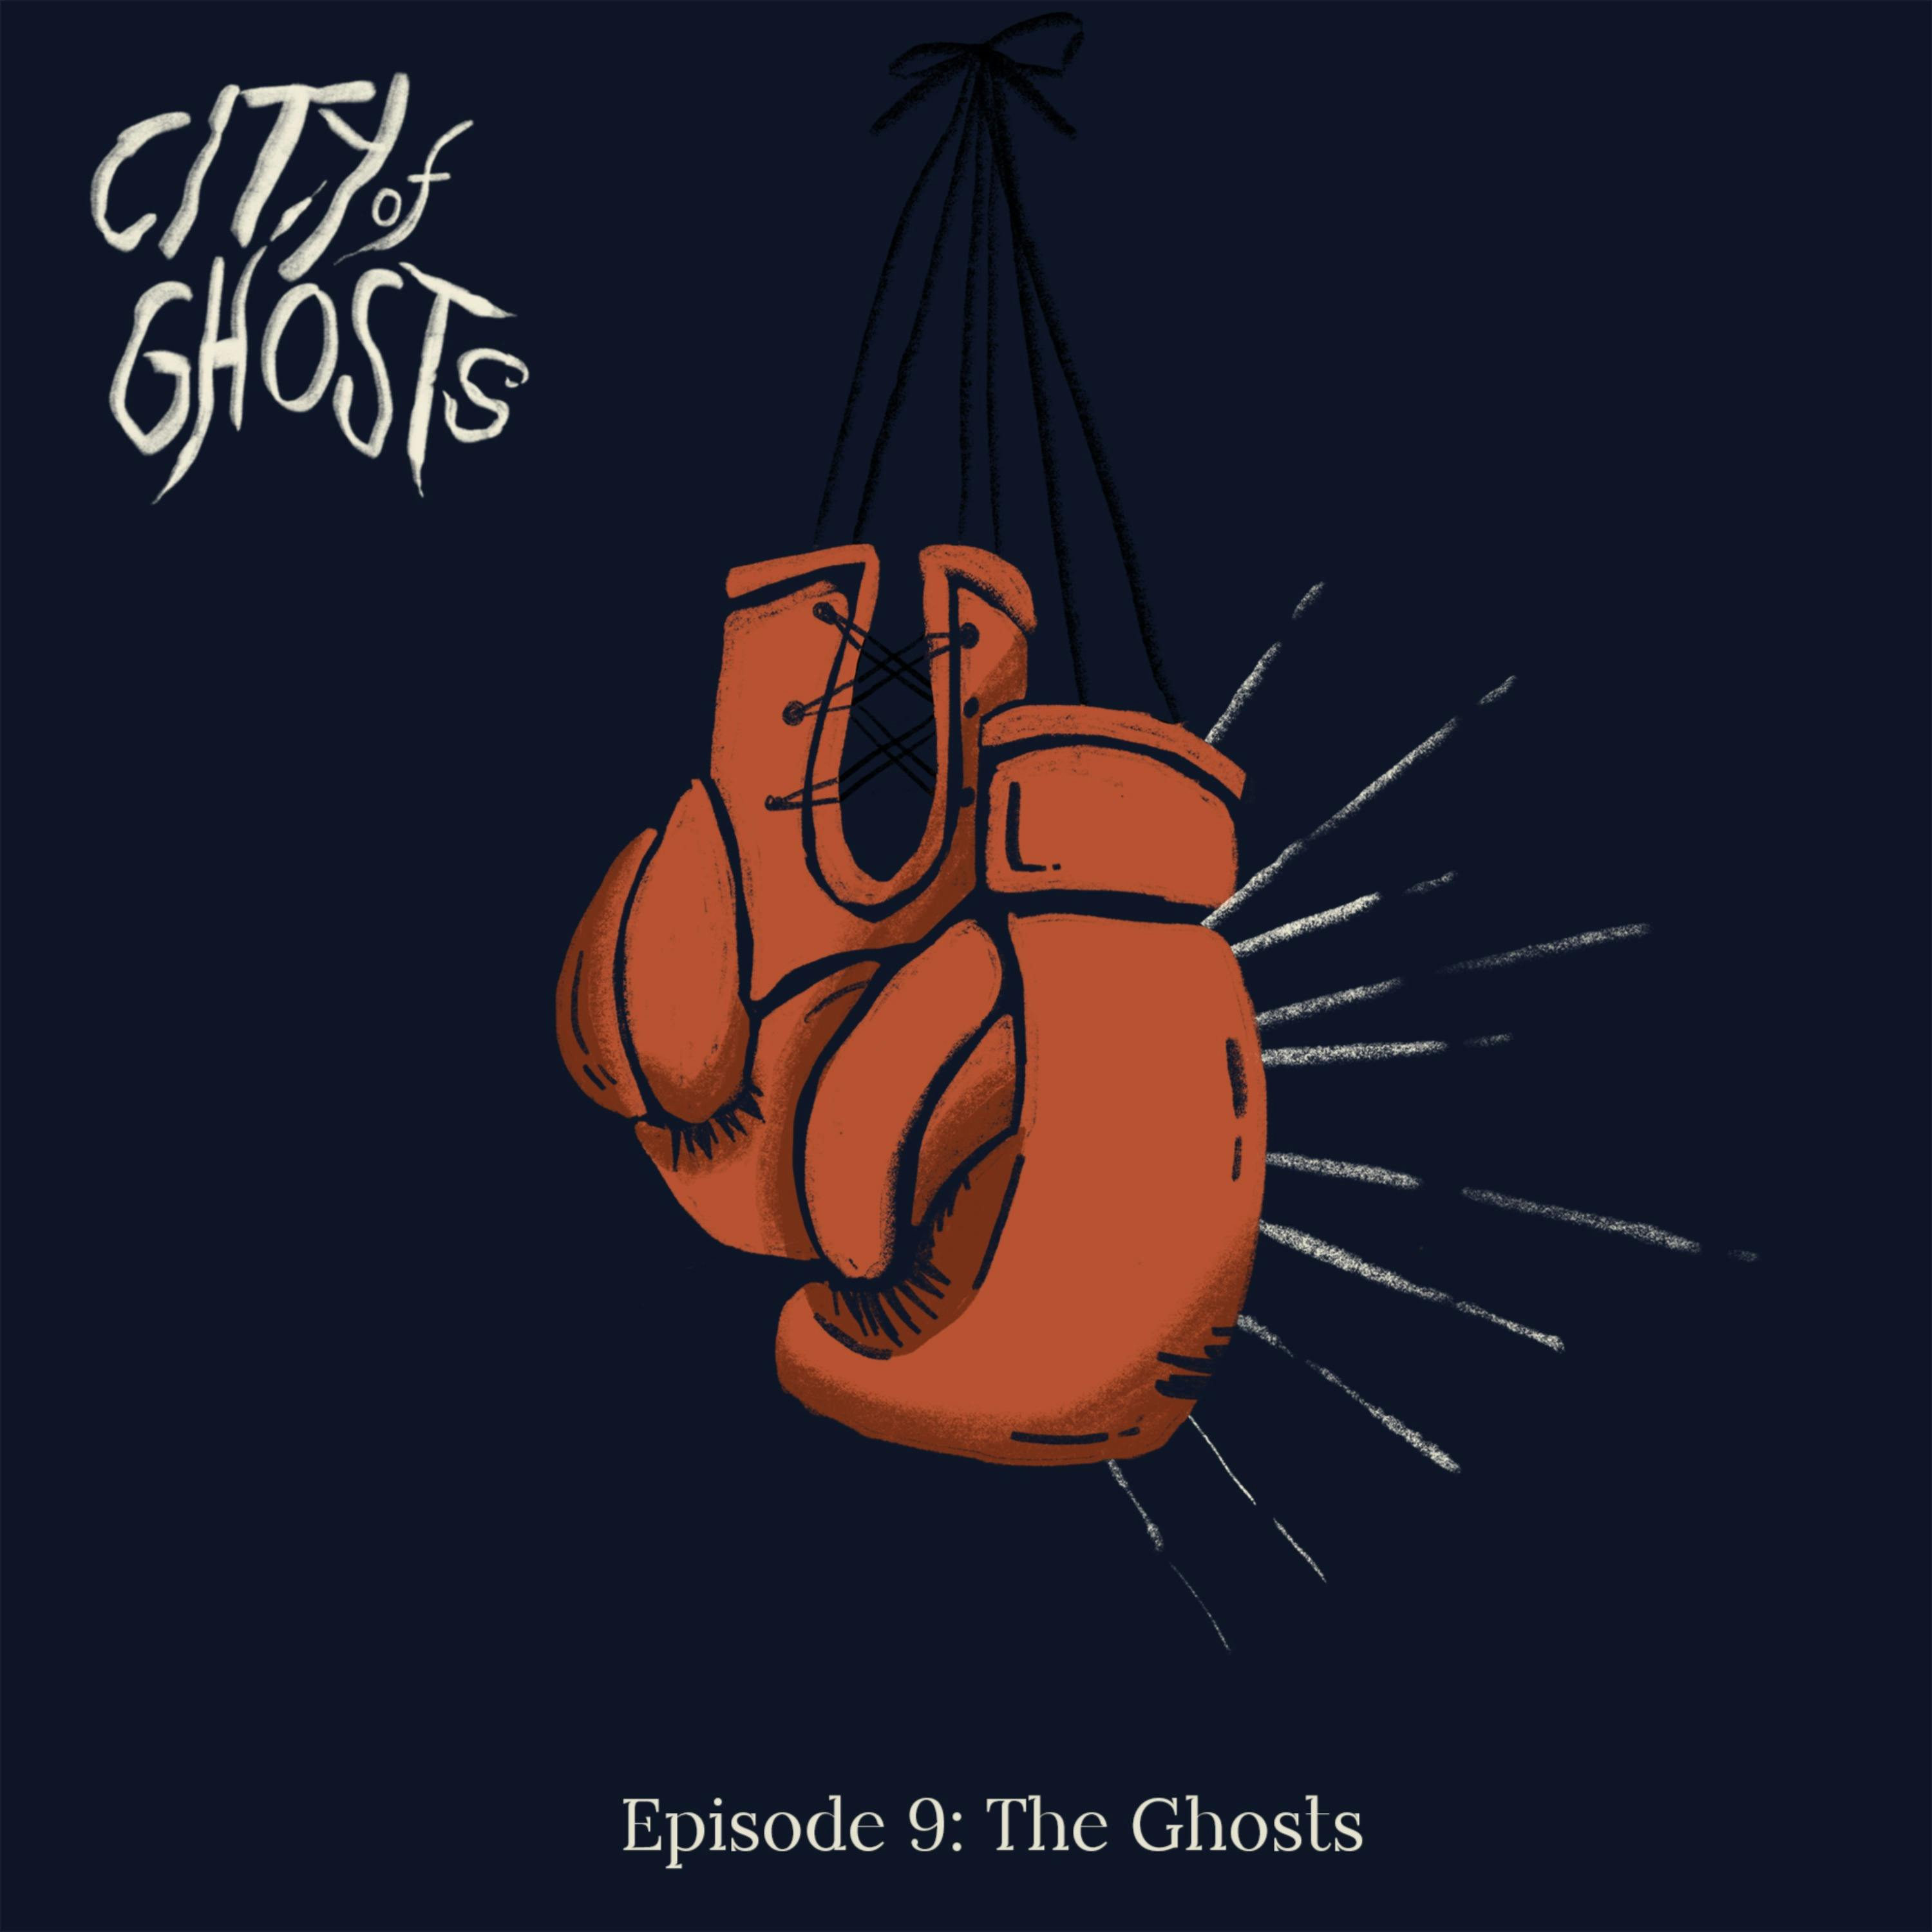 Episode 9: The Ghosts